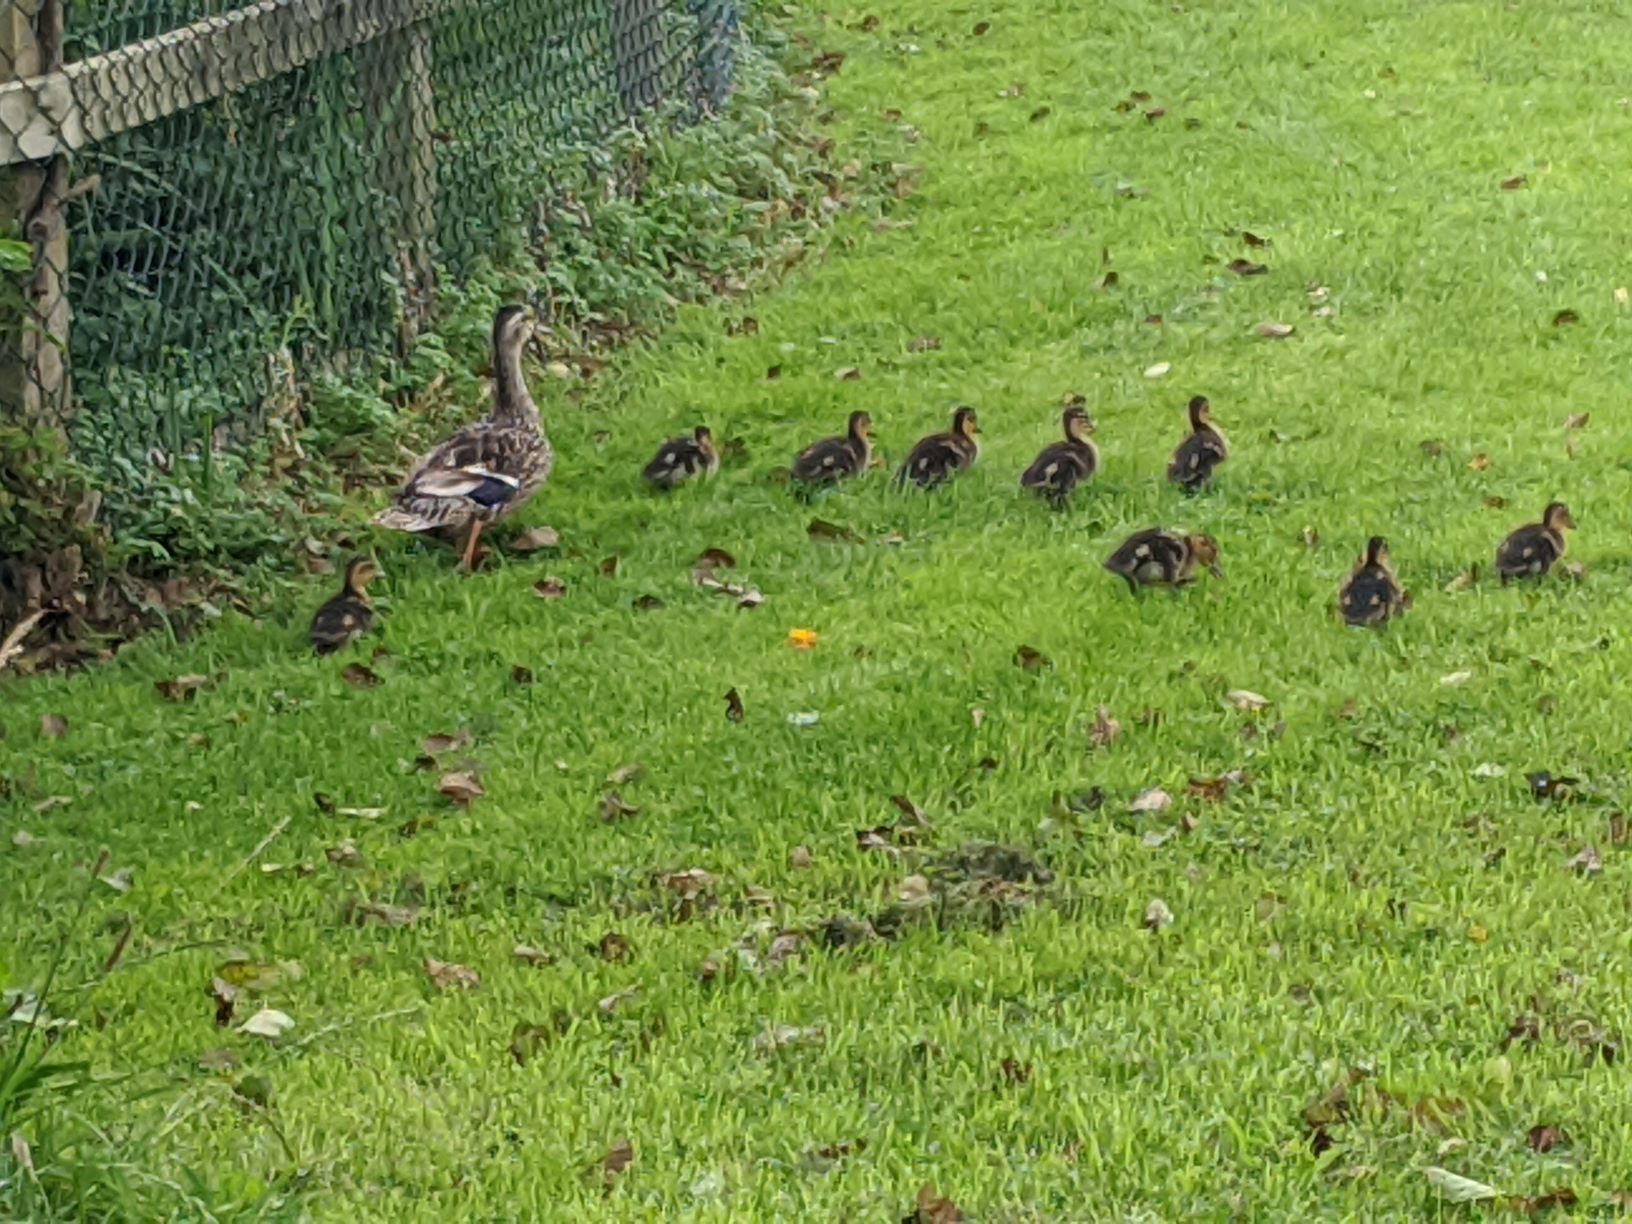 Nine ducklings starting to grow, August 23rd